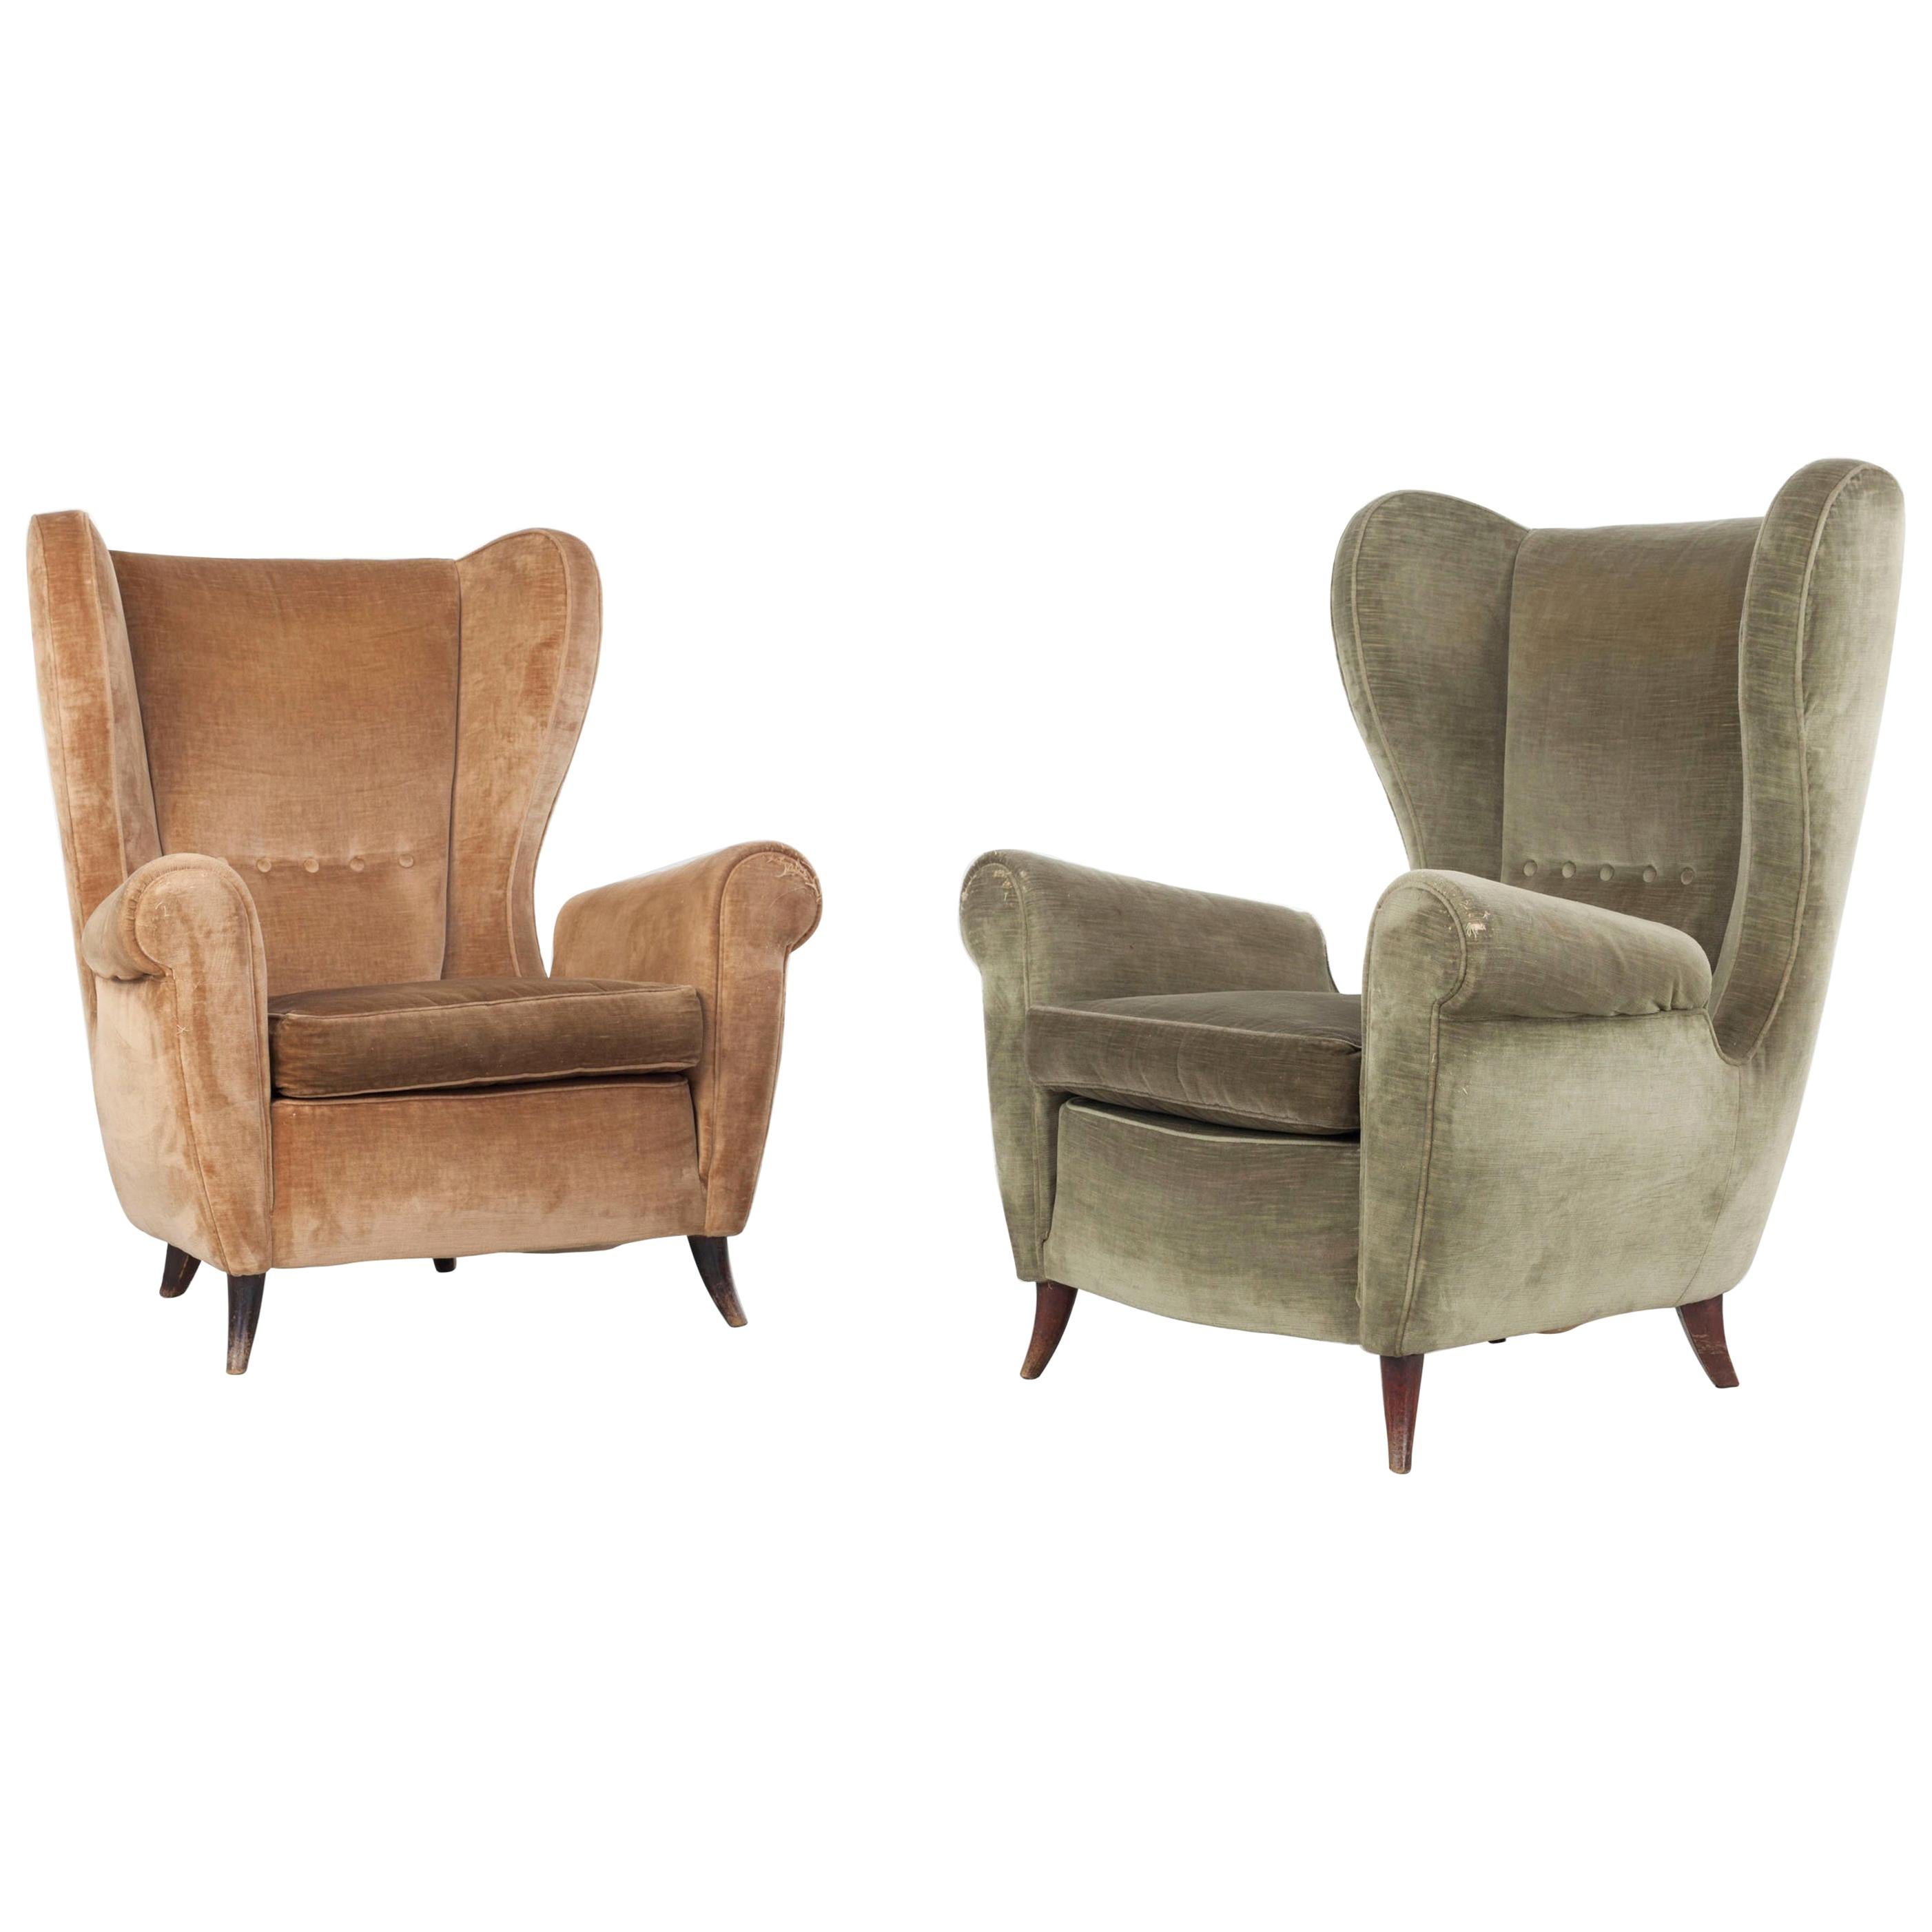 Set of Two Italian Armchairs in Original Upholstery of Brown and Green, 1950s For Sale